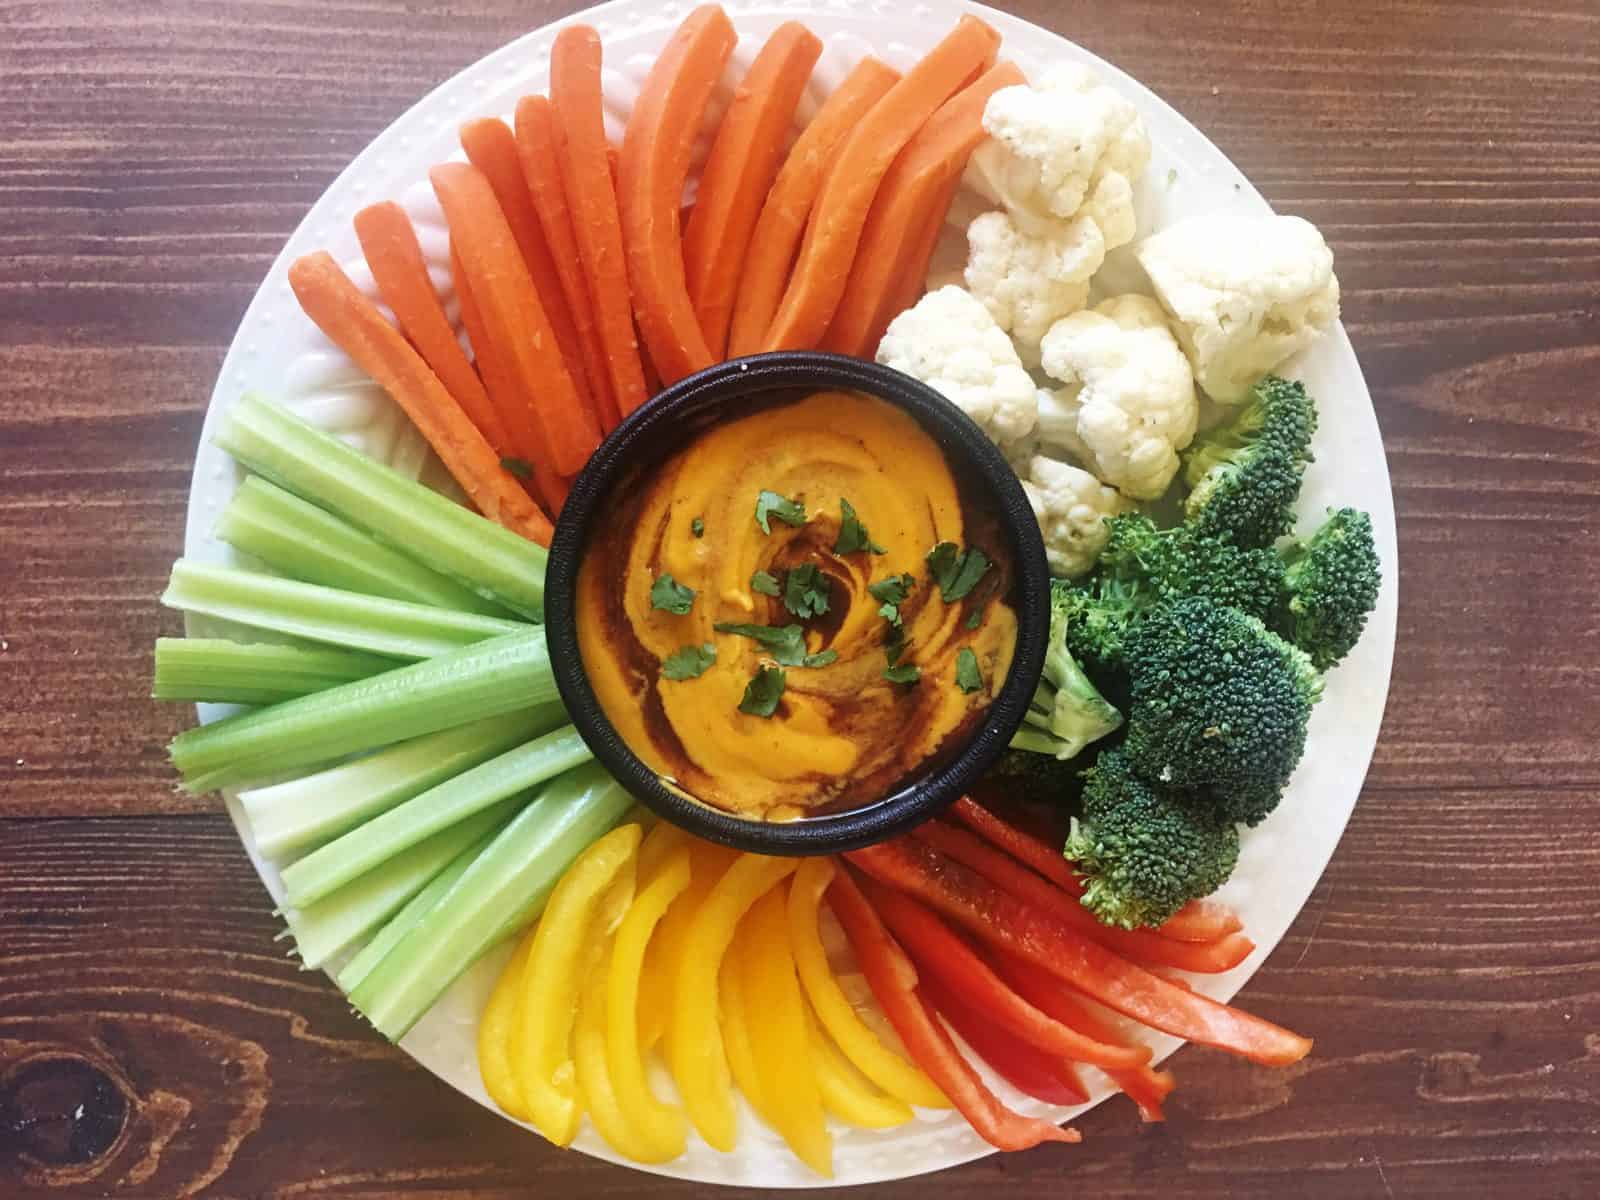 Vegan Chili Cheese Sauce with Vegetable Plate